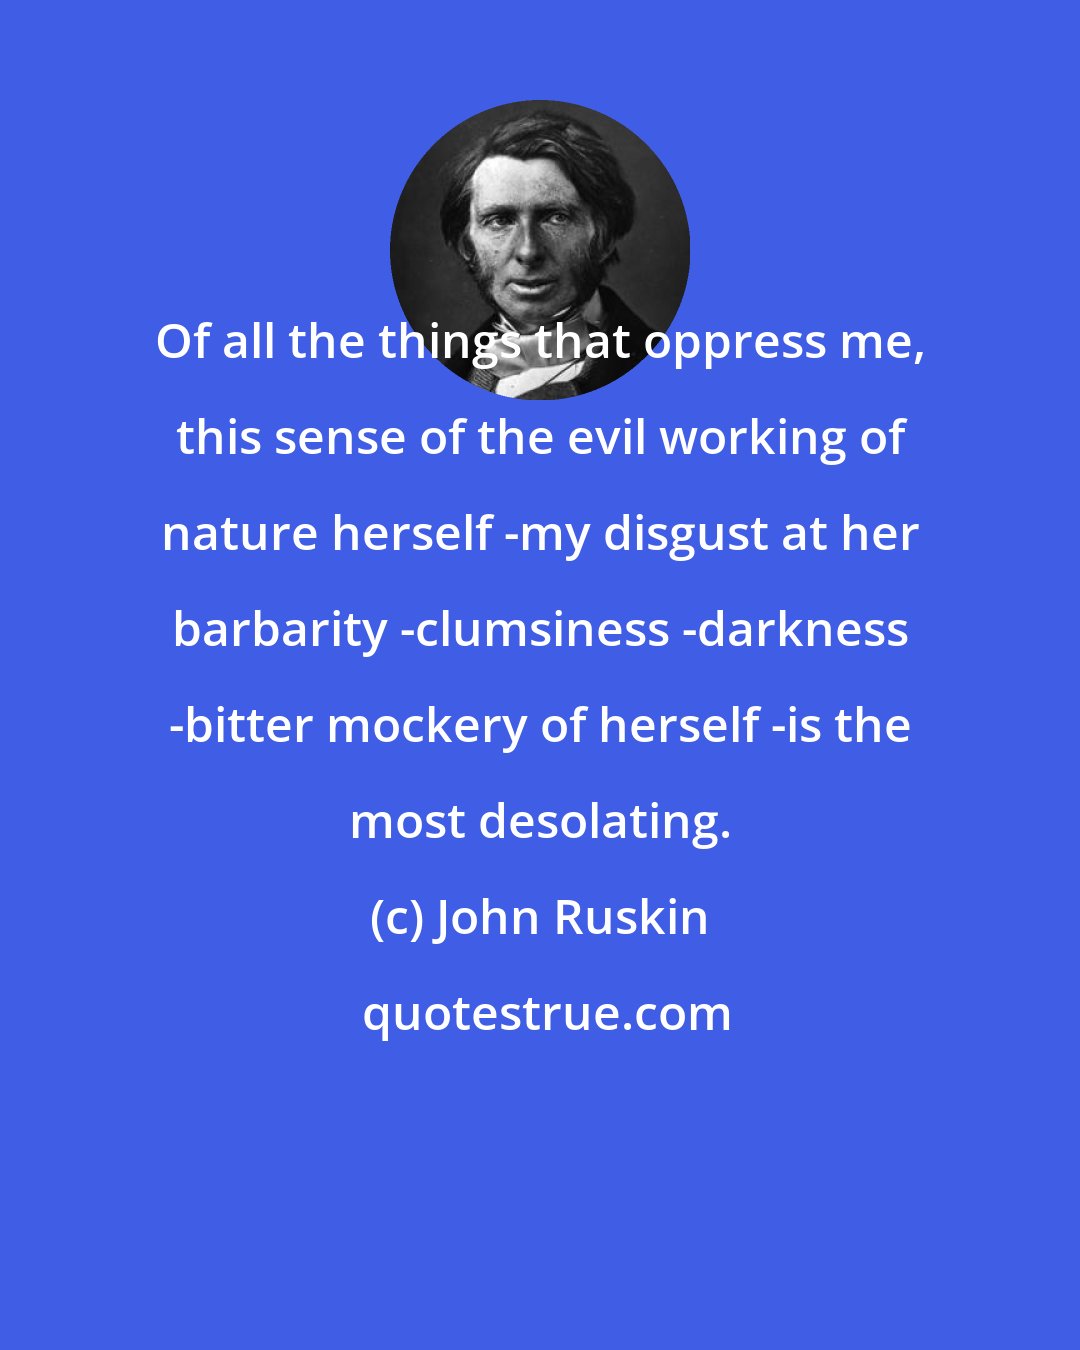 John Ruskin: Of all the things that oppress me, this sense of the evil working of nature herself -my disgust at her barbarity -clumsiness -darkness -bitter mockery of herself -is the most desolating.